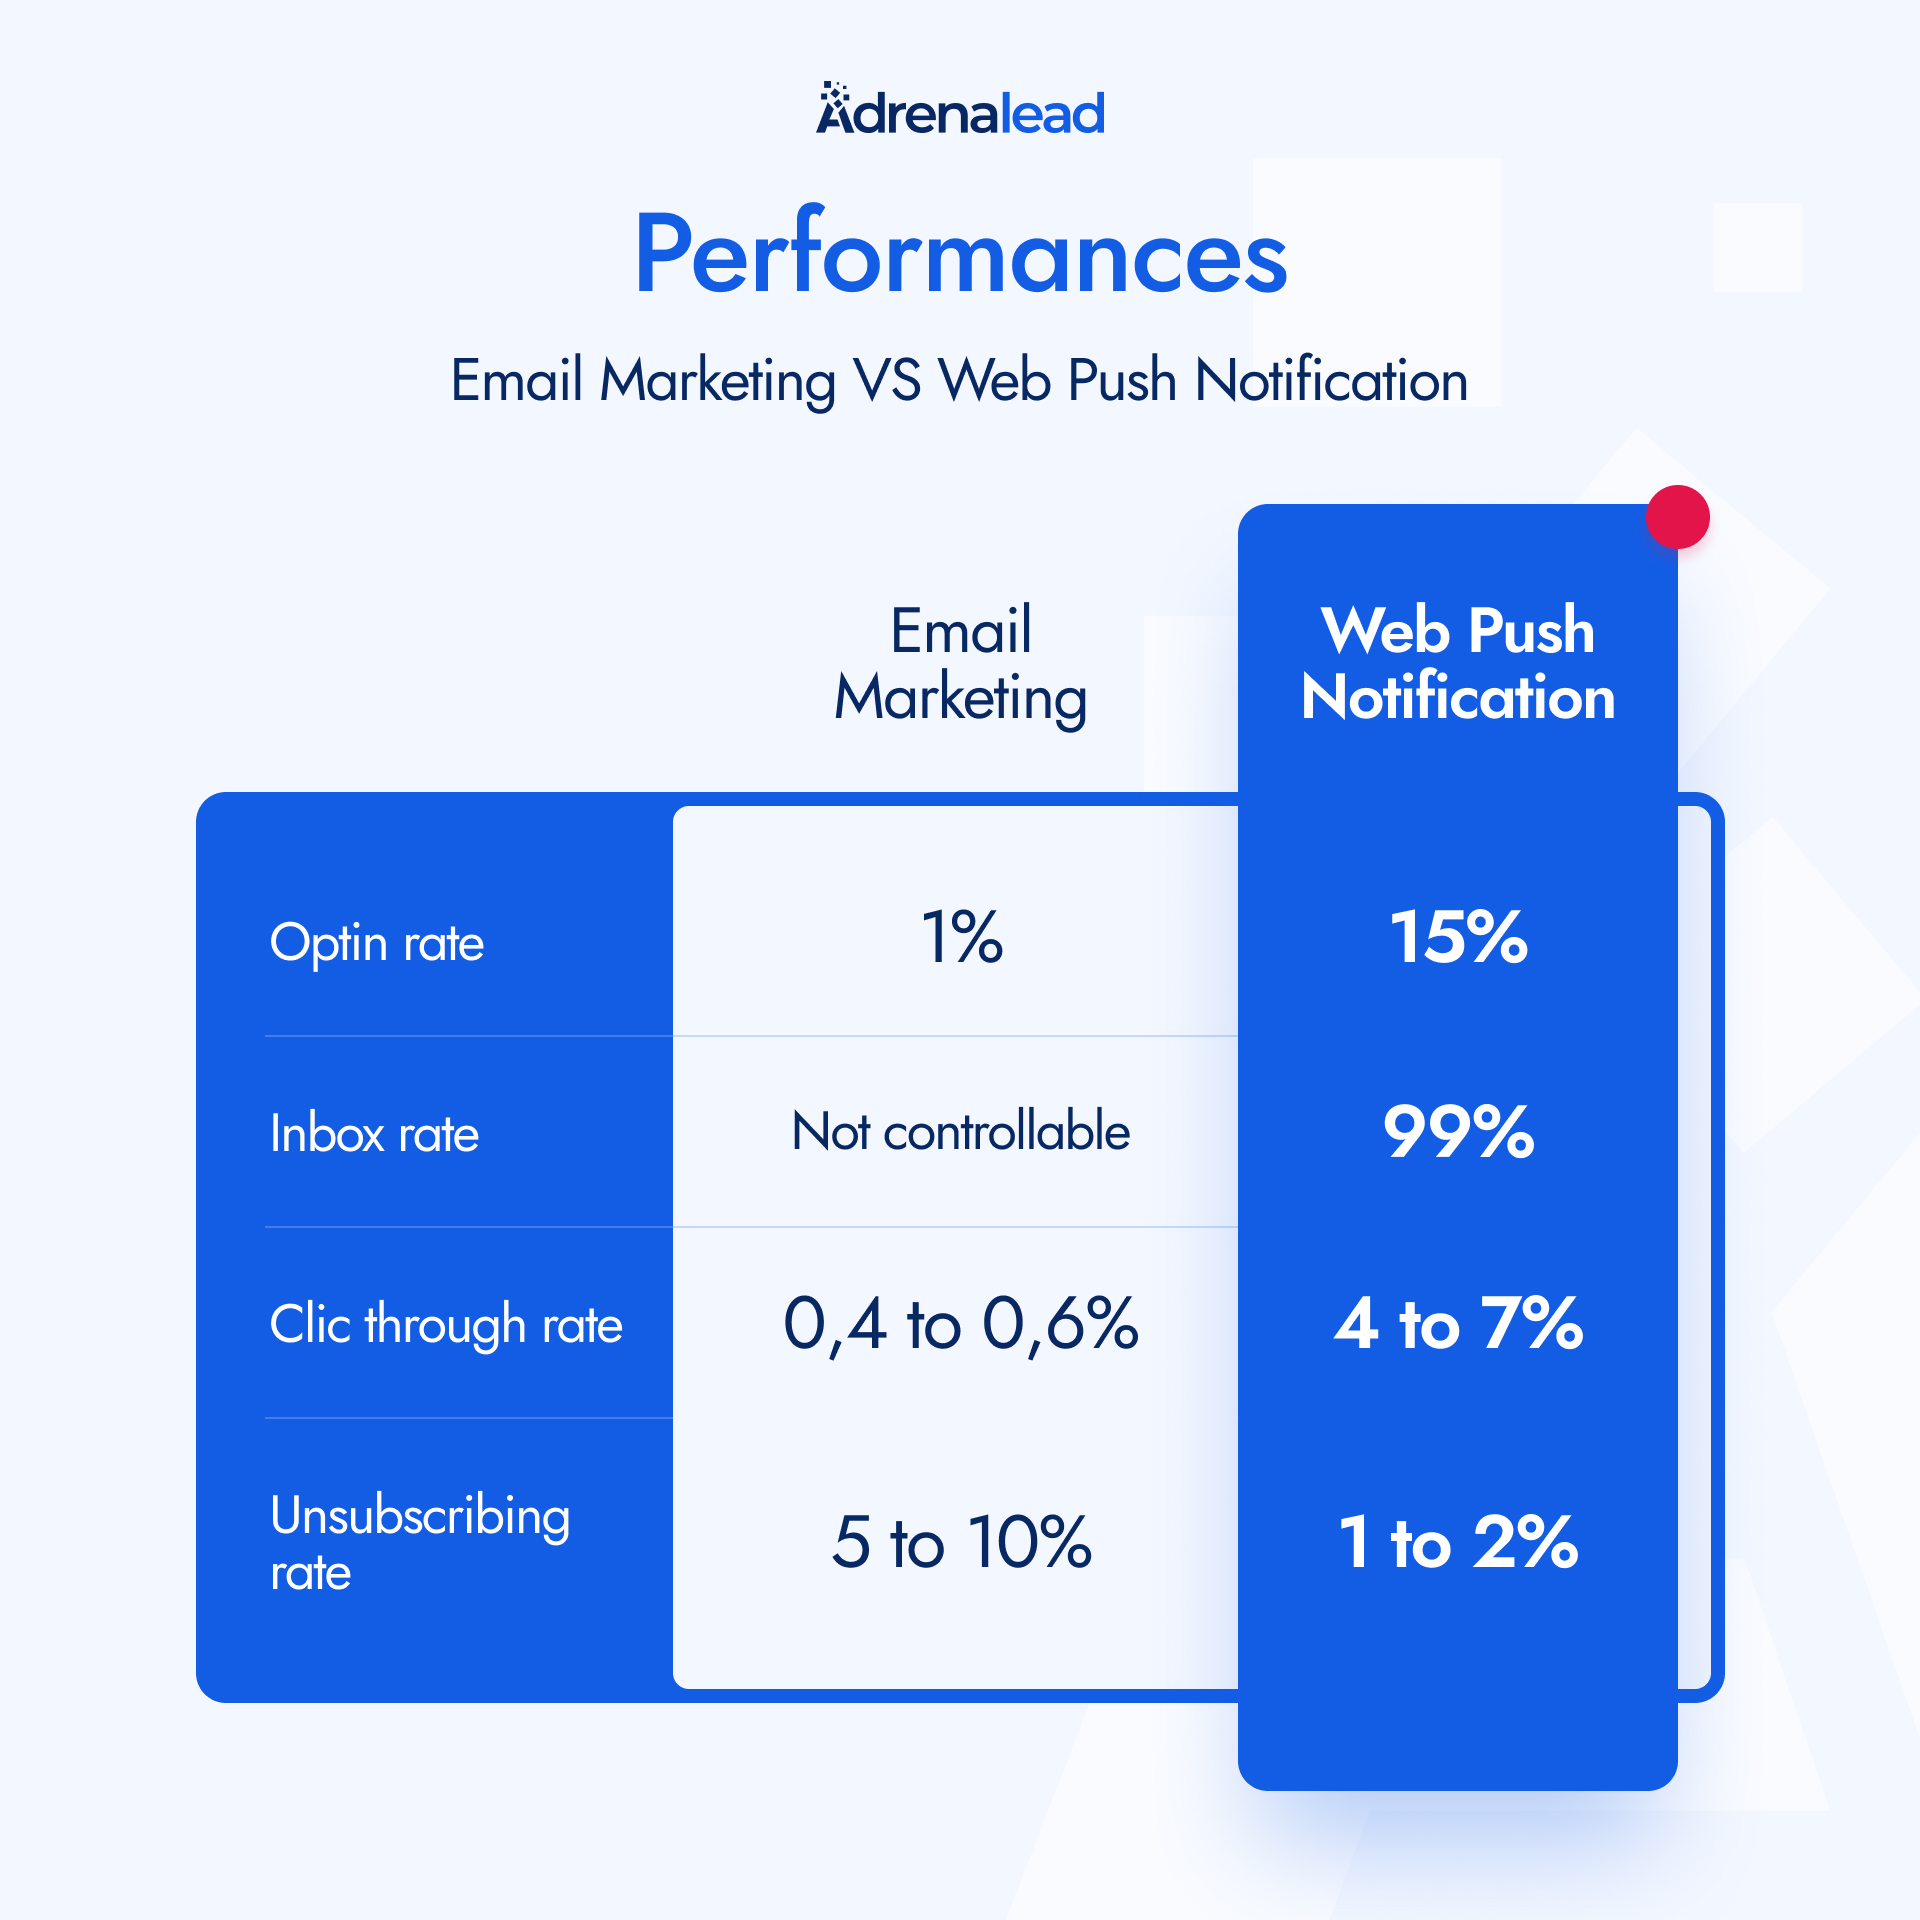 Web Push Notification and Email Marketing performance comparison
